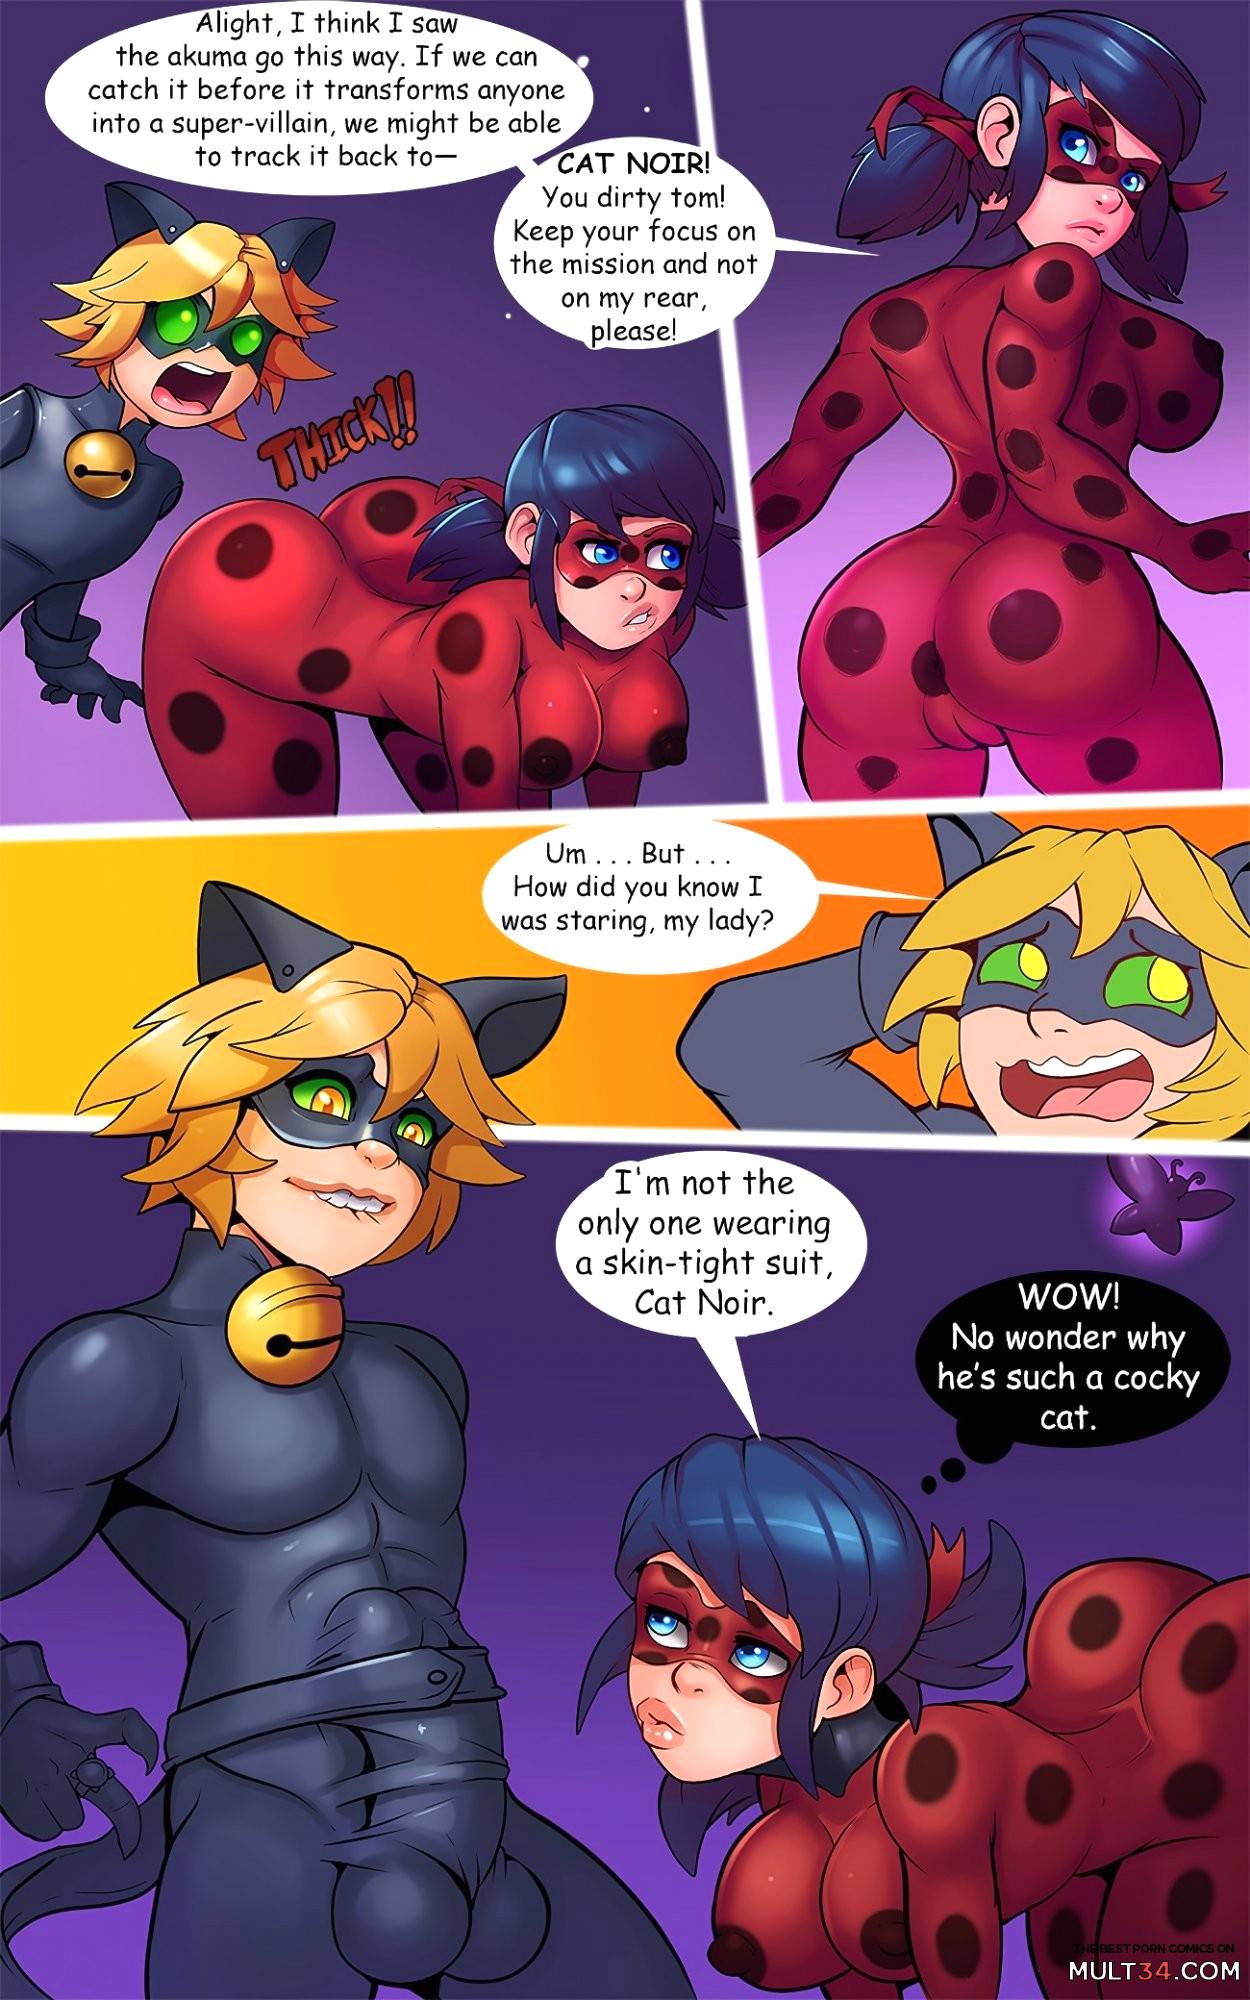 The Best Miraculous Ladybug Erotic Comics You'll Find Anywhere